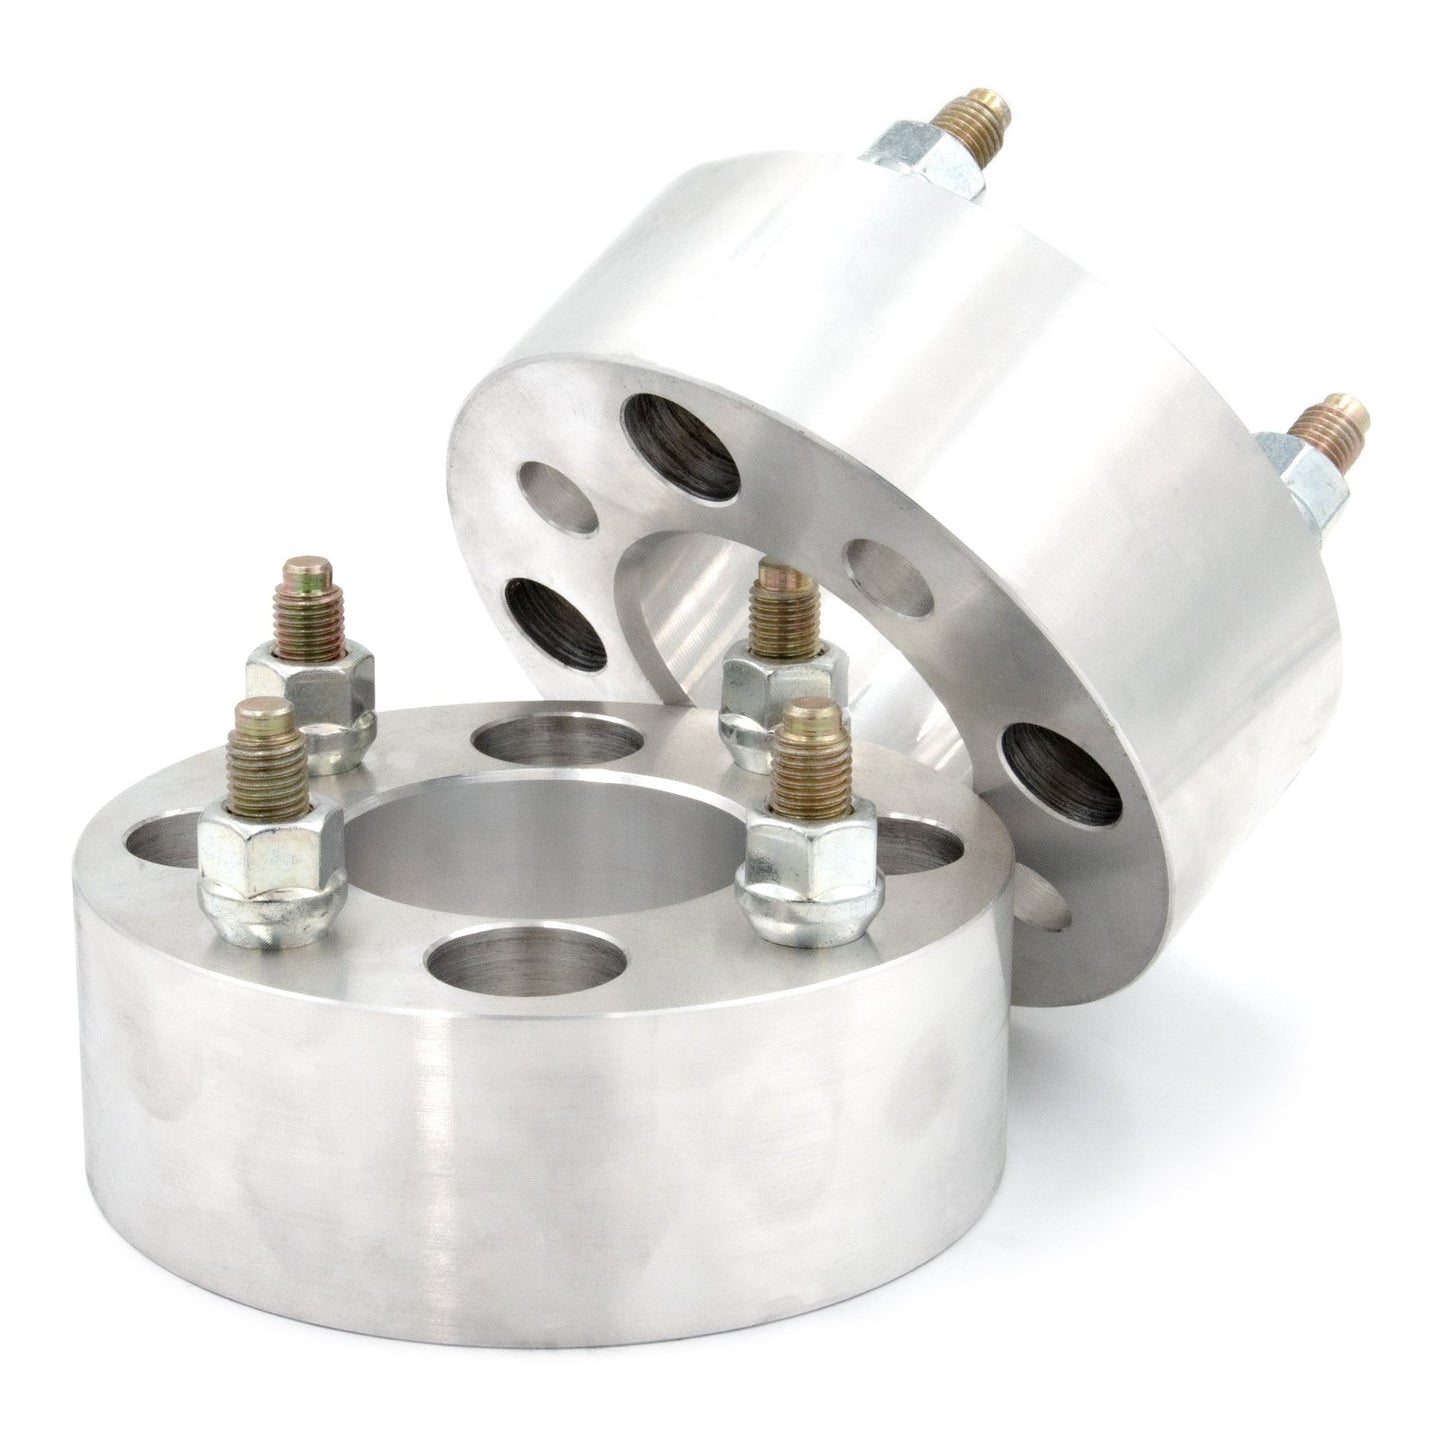 4x120 to 4x110 Wheel Spacer/Adapter - Thickness: 3/4"- 4"